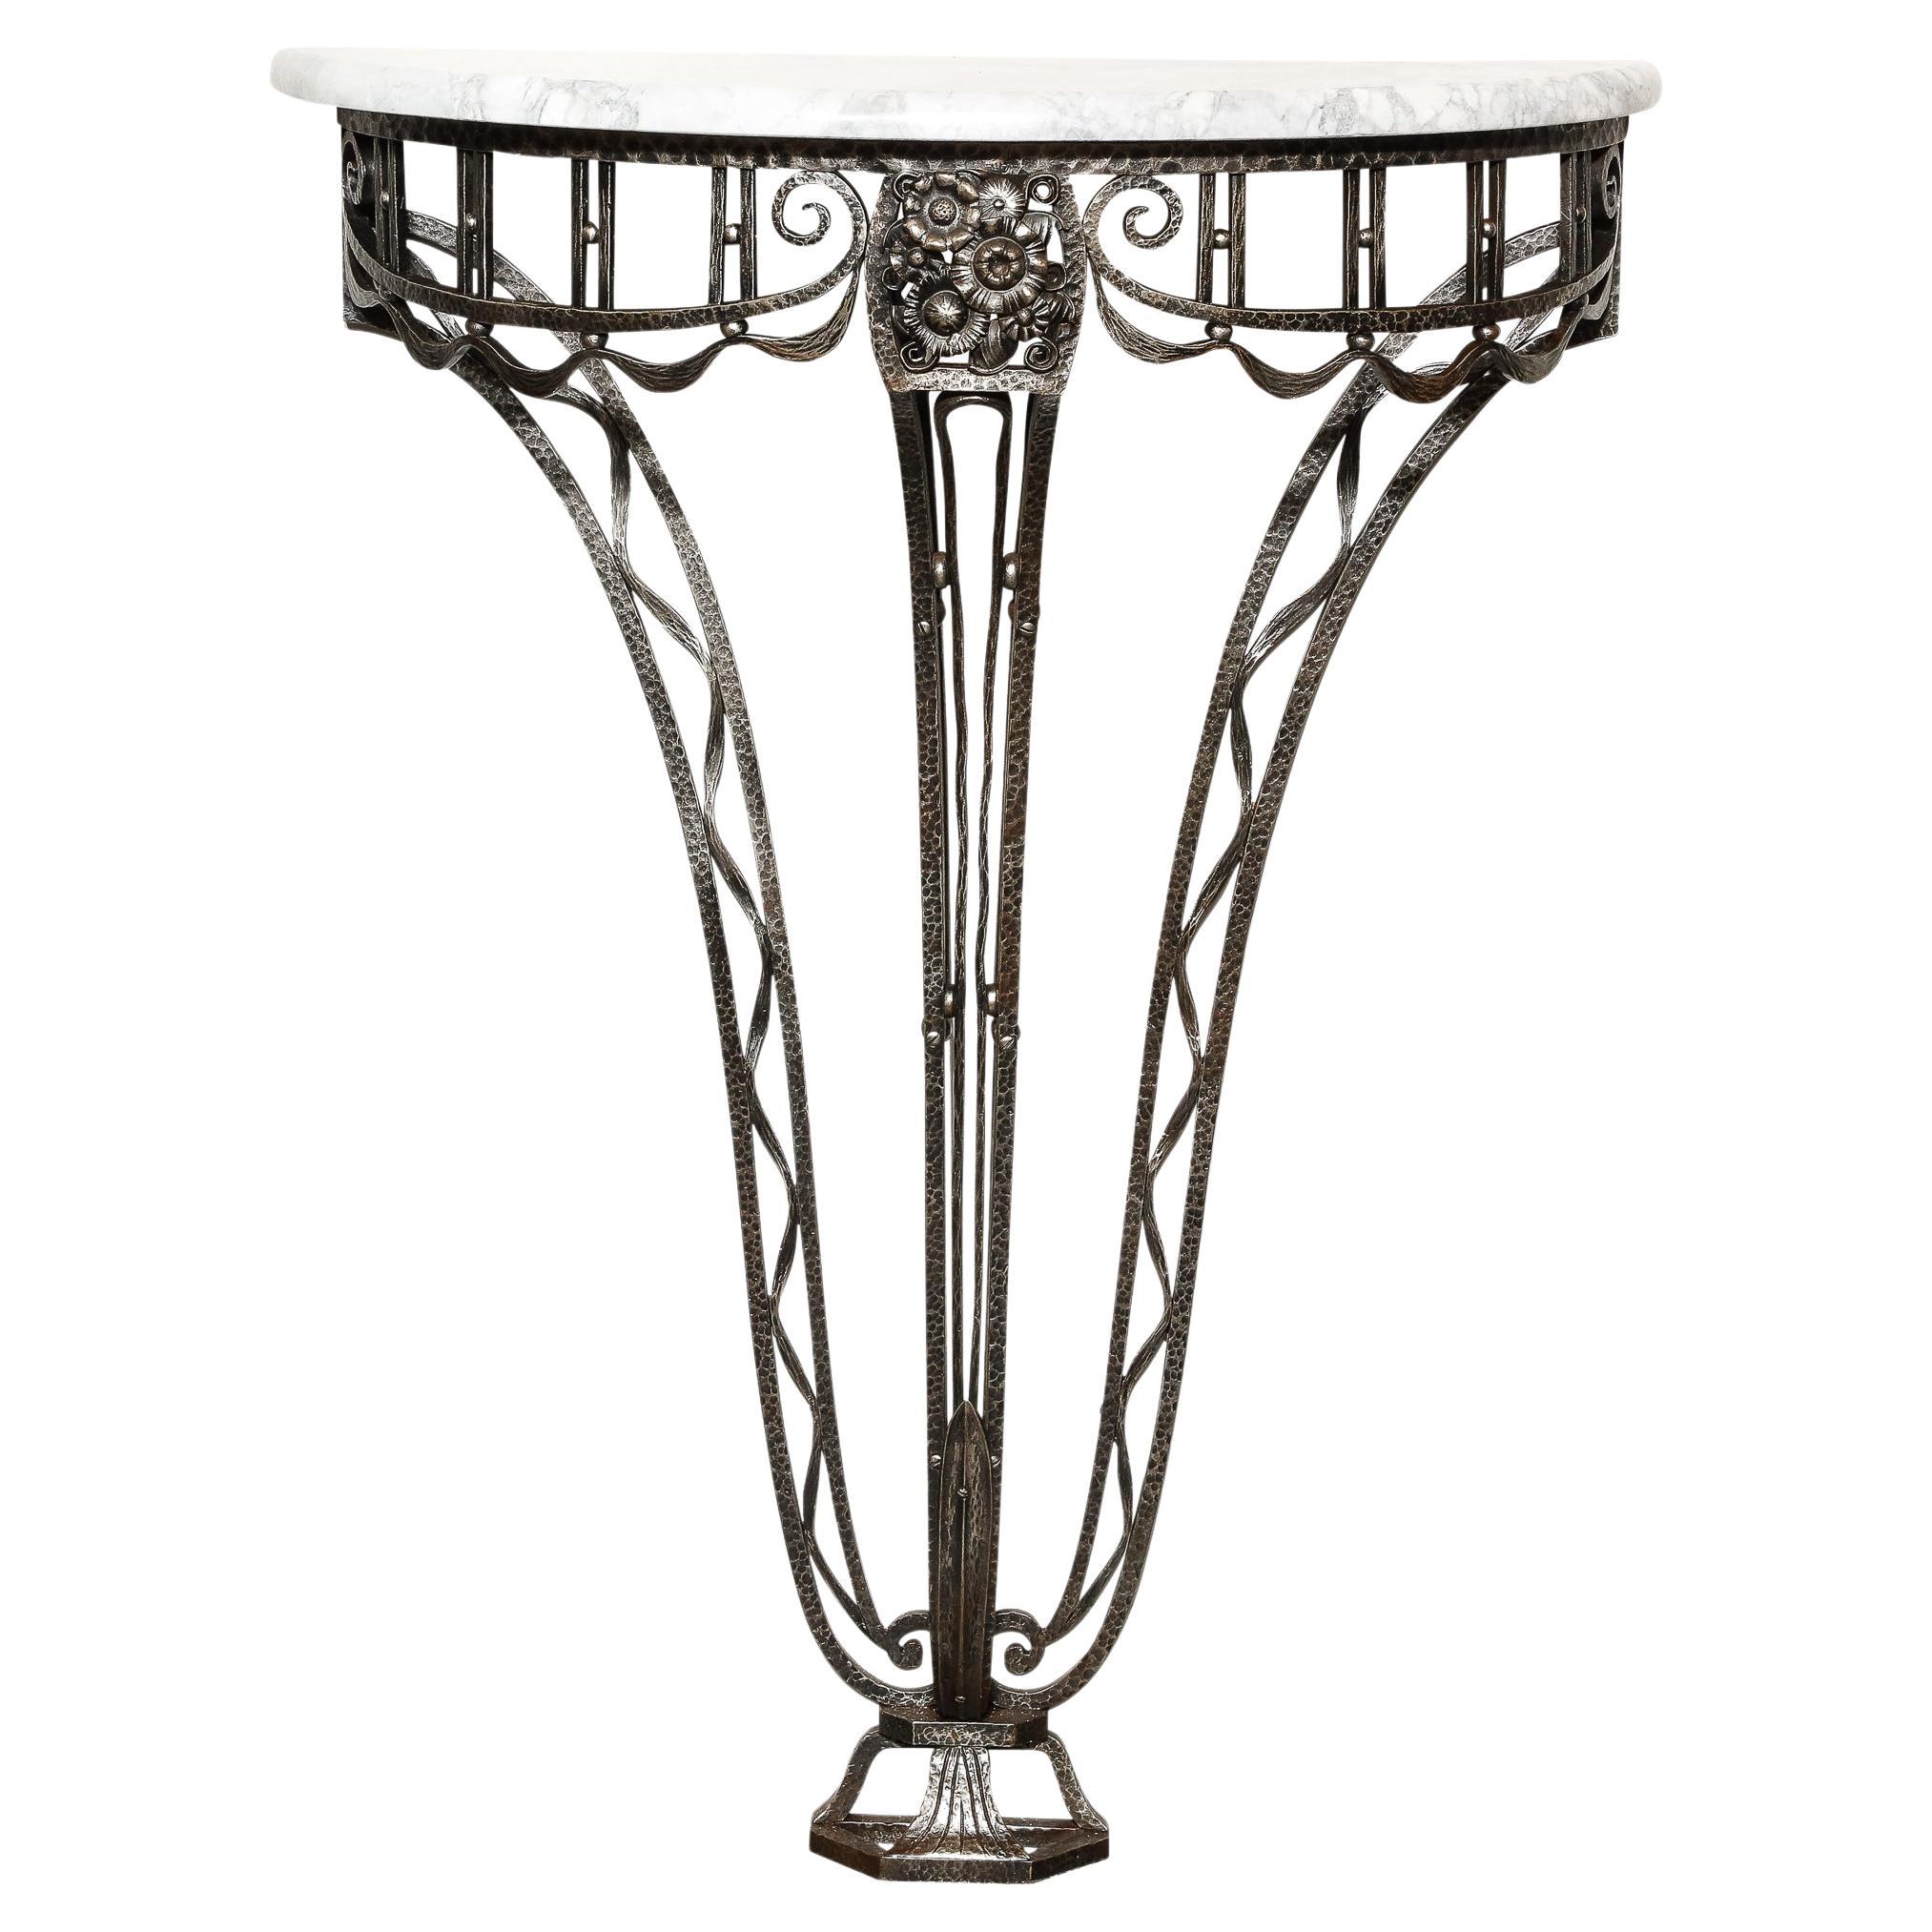 Art Deco Wrought Iron Console Table w/ Stylized Geometric Details & Grey Marble